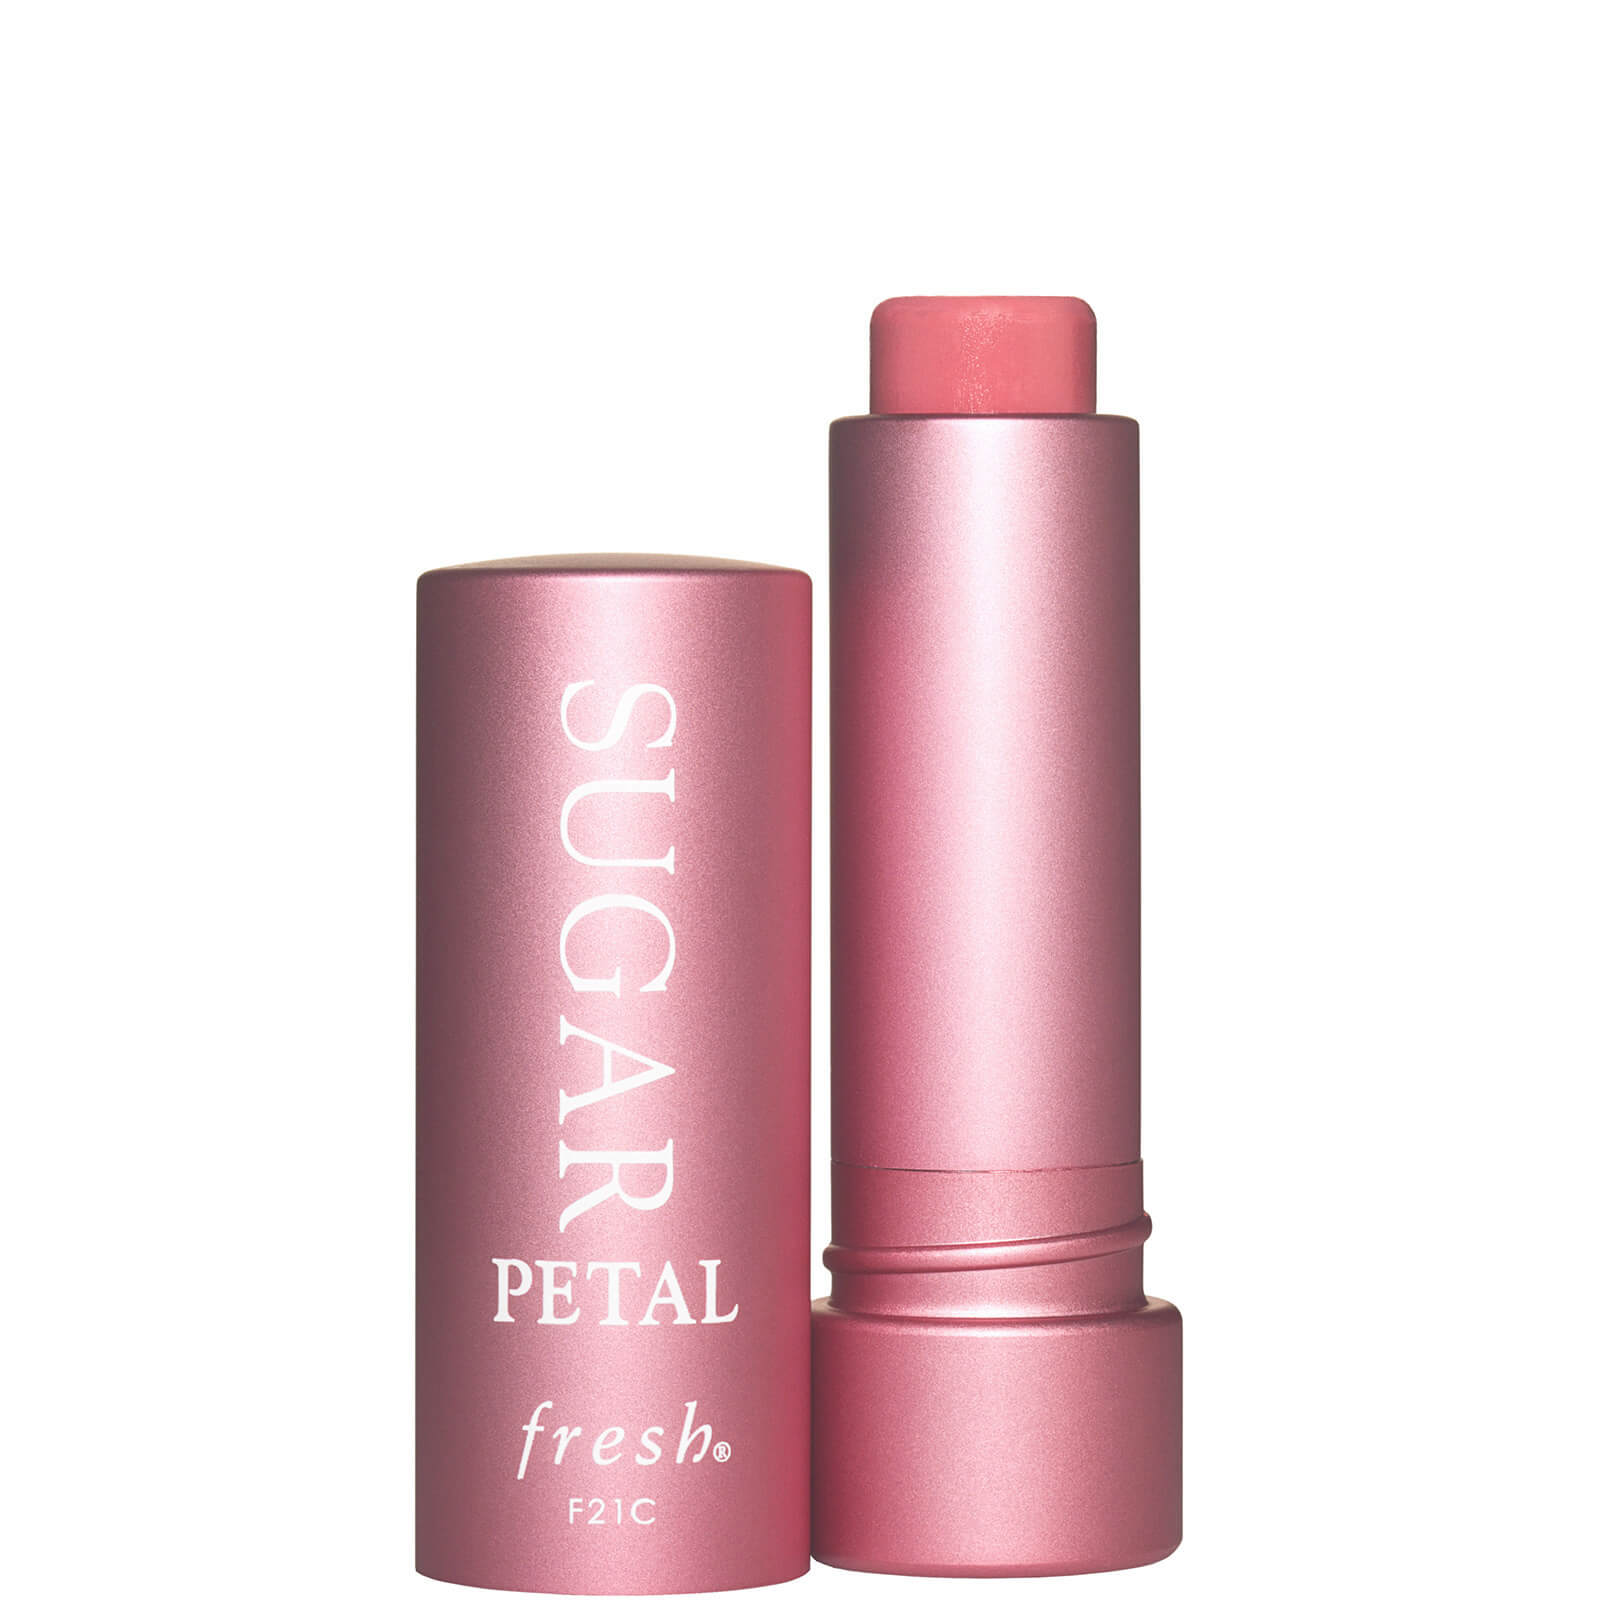 A Fresh bestseller, the award-winning Sugar Lip Treatment comes in a muted ...